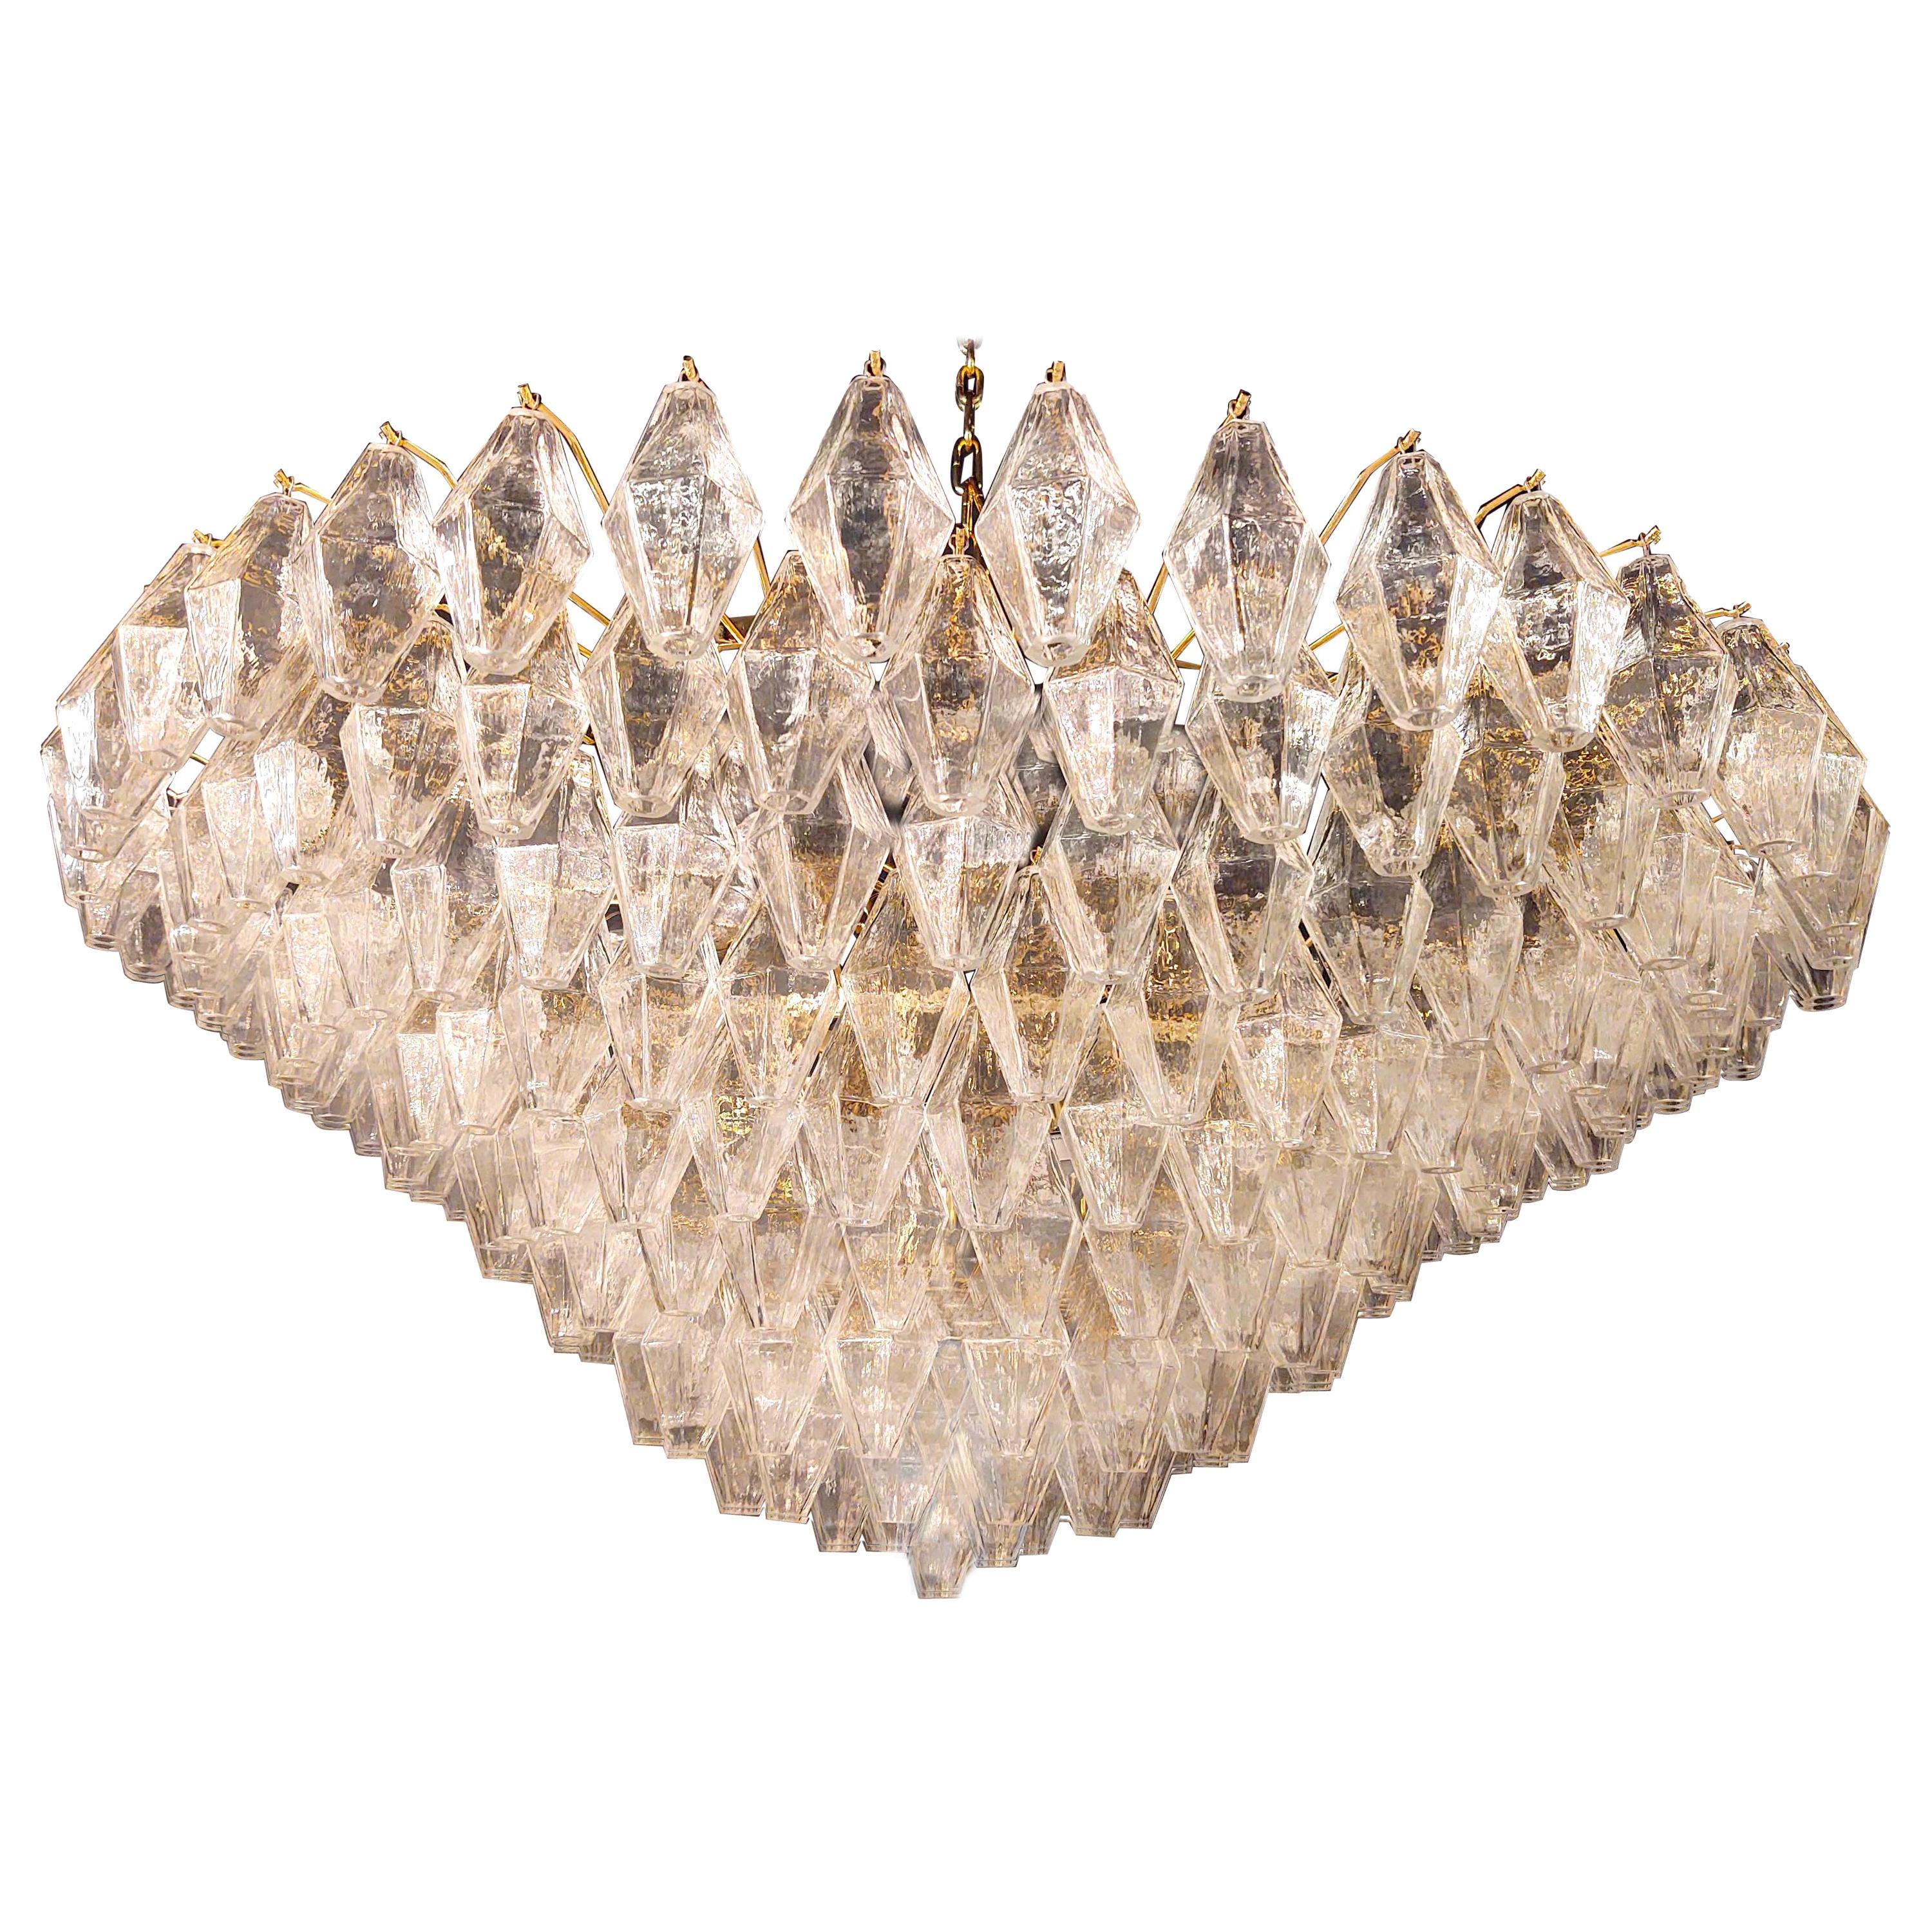 Extraordinary Large Poliedri Murano Glass Ceiling Light or Chandelier For Sale 5